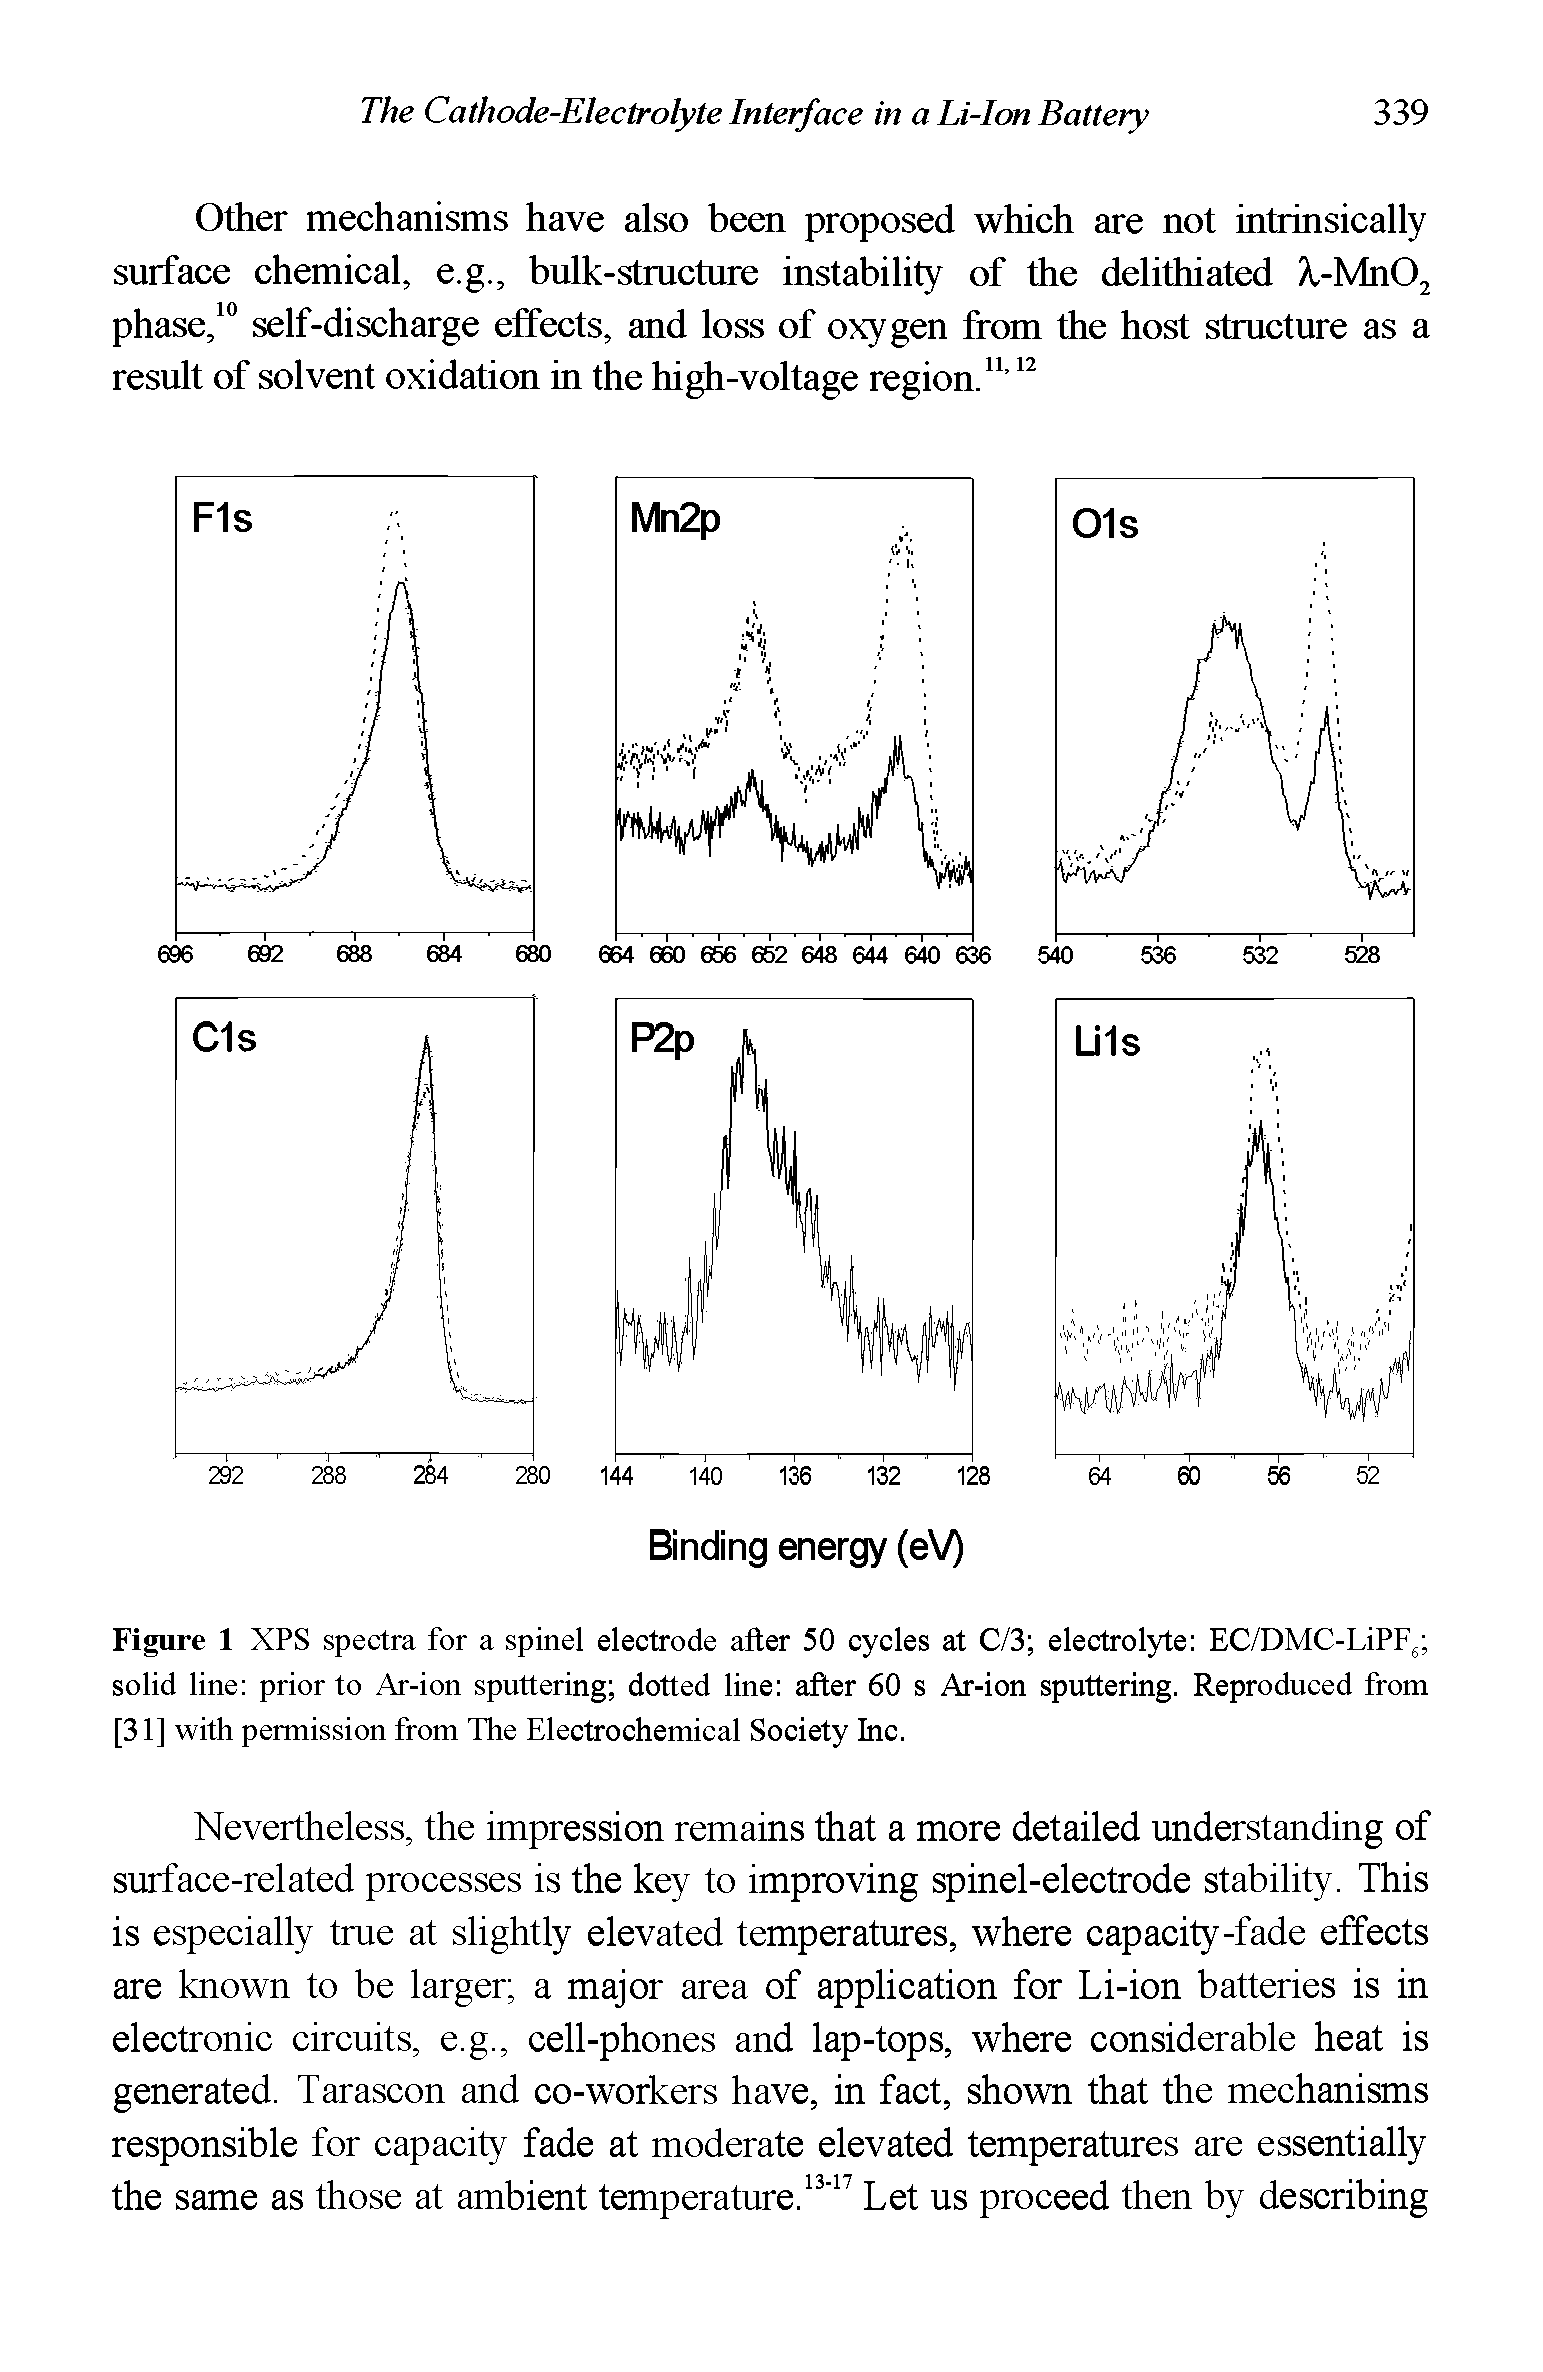 Figure 1 XPS spectra for a spinel electrode after 50 cycles at C/3 electrolyte EC/DMC-LiPF solid line prior to Ar-ion sputtering dotted line after 60 s Ar-ion sputtering. Reproduced from [31] with permission from The Electrochemical Society Inc.